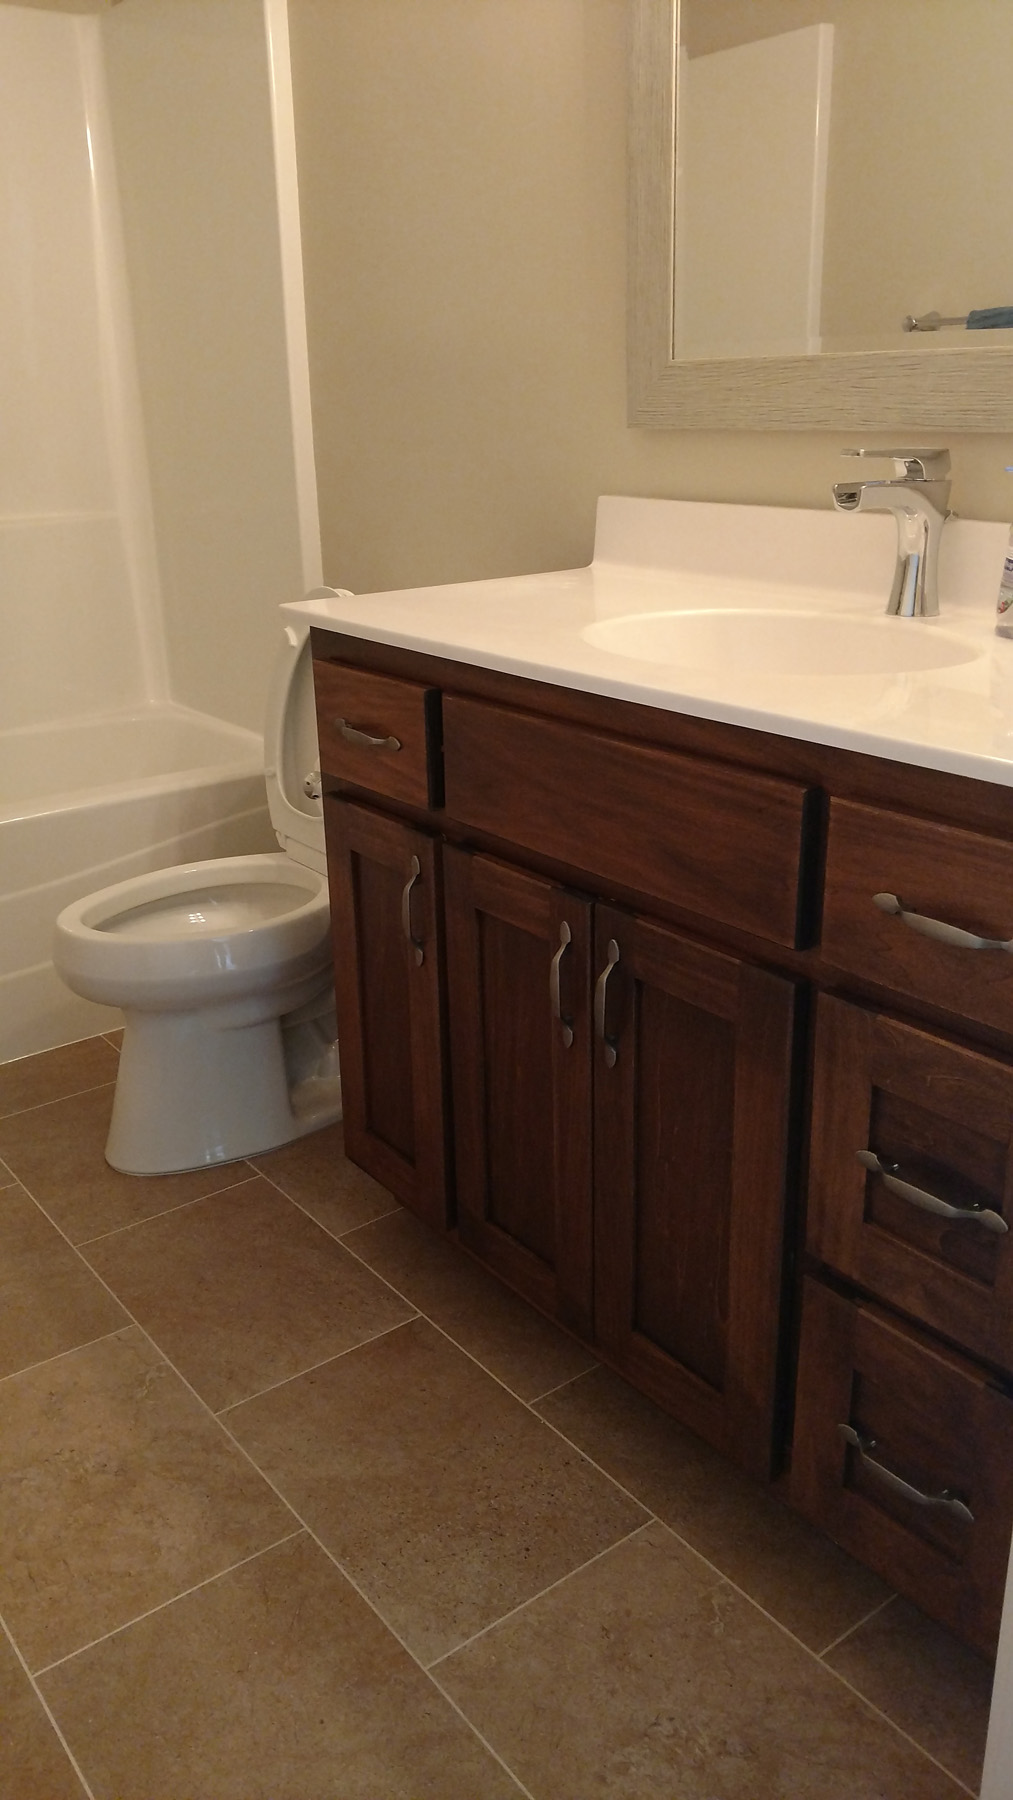 Bathroom with Knotty Alder Vanity Cabinets